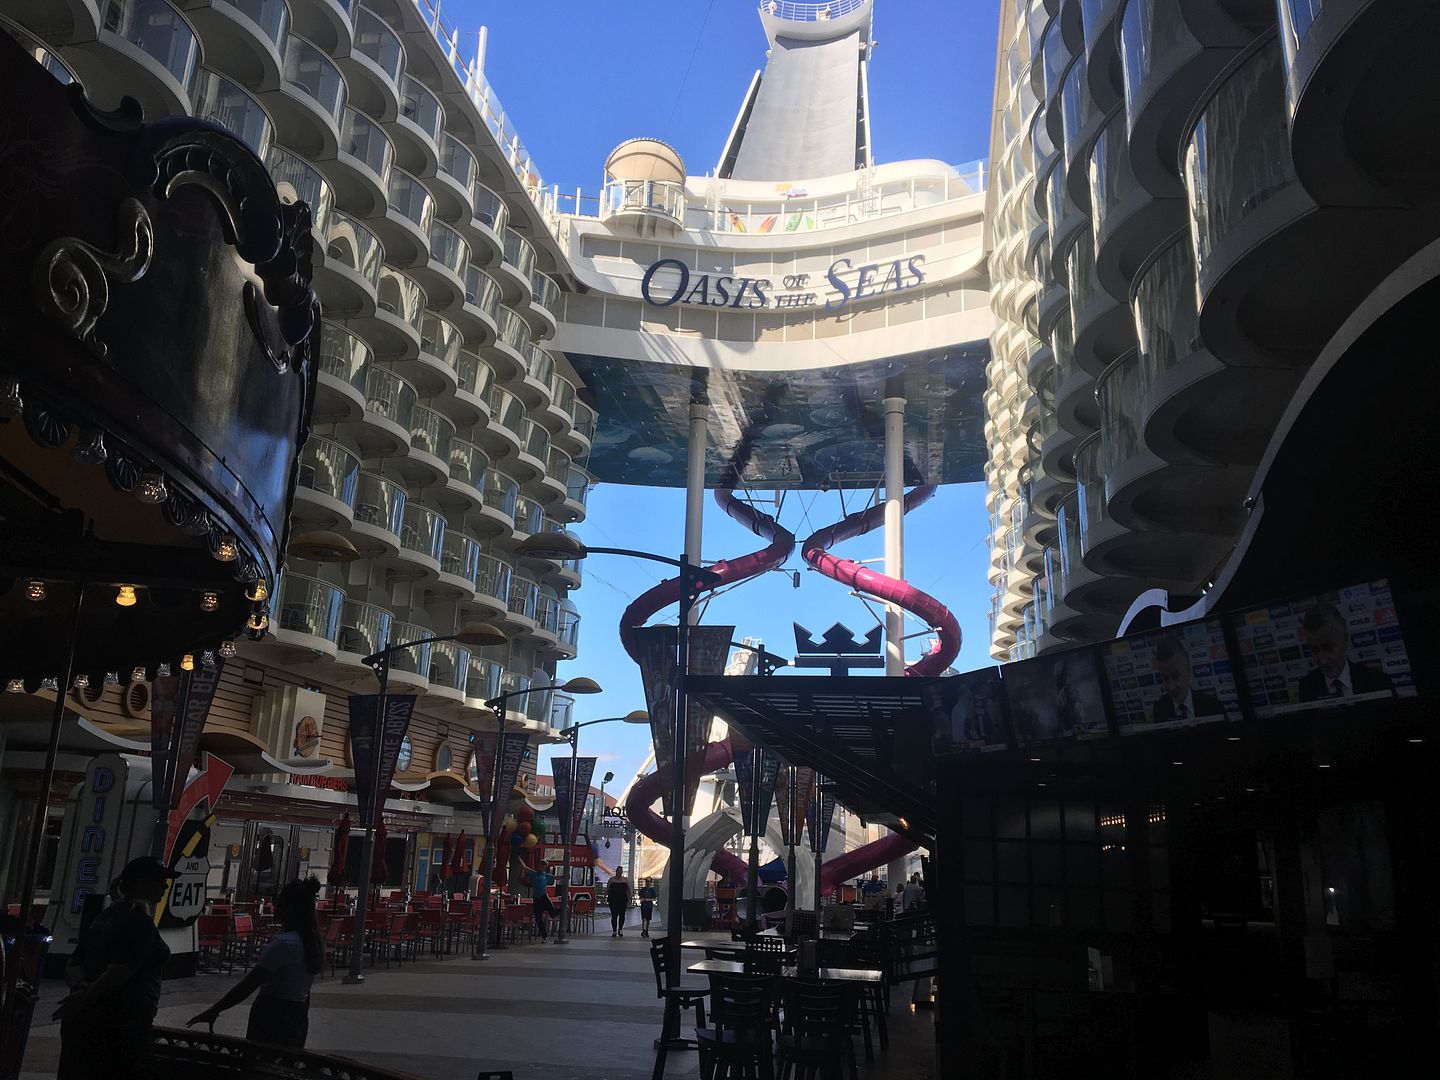 "Live" From Oasis of the Seas. December 18, 2019 AMPed Up Fourfector